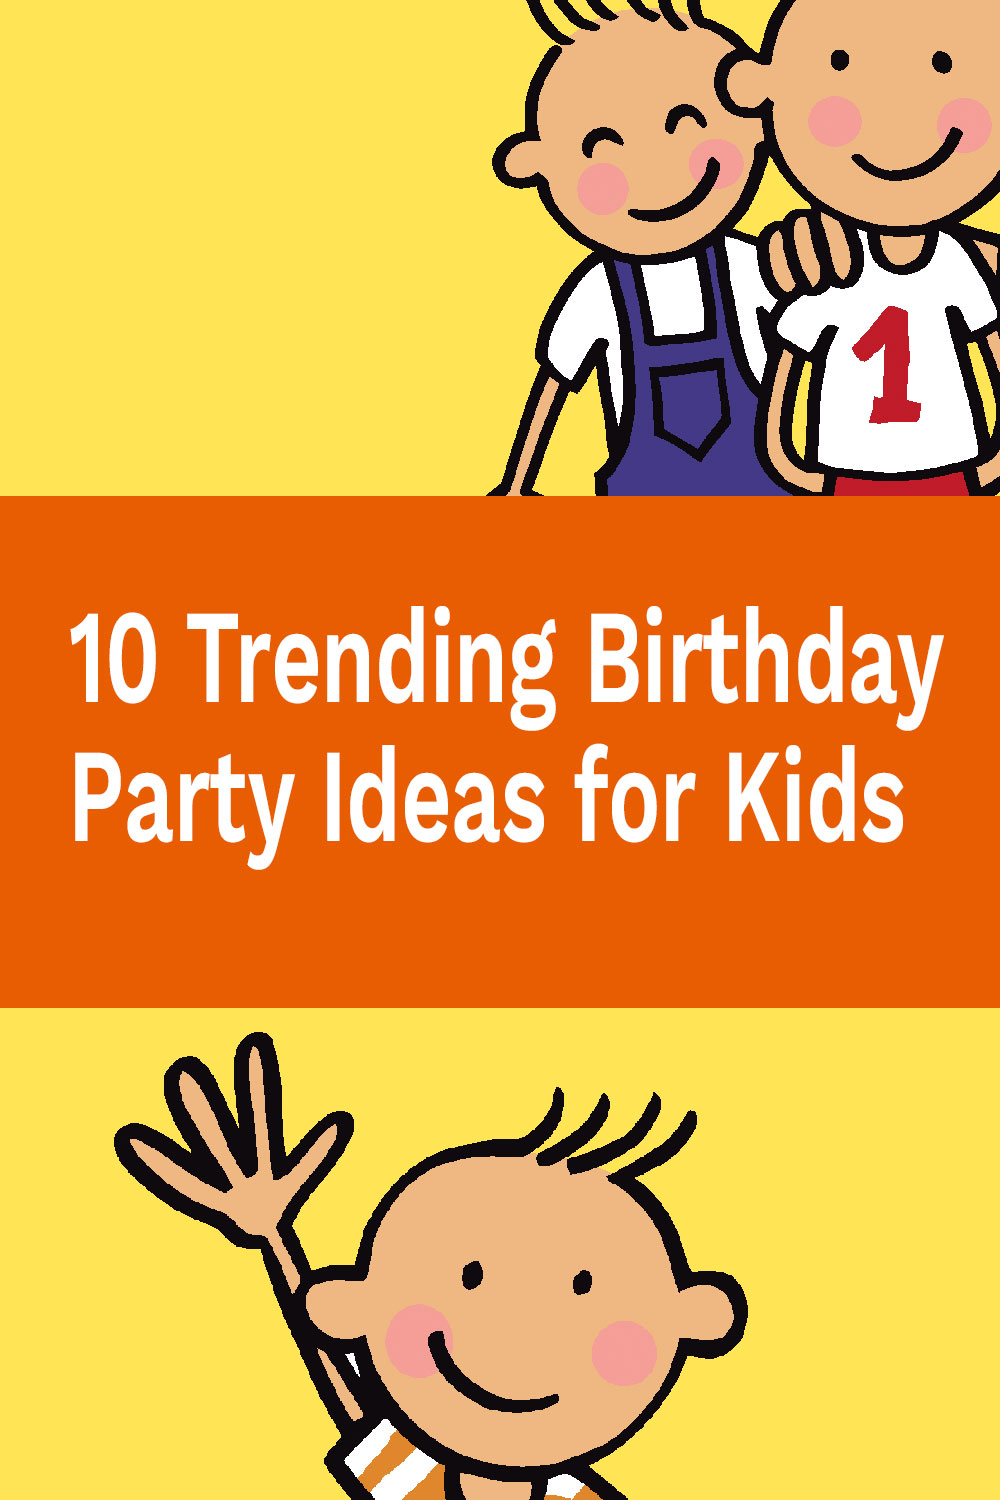 10 Trending Birthday Party Ideas for Kids